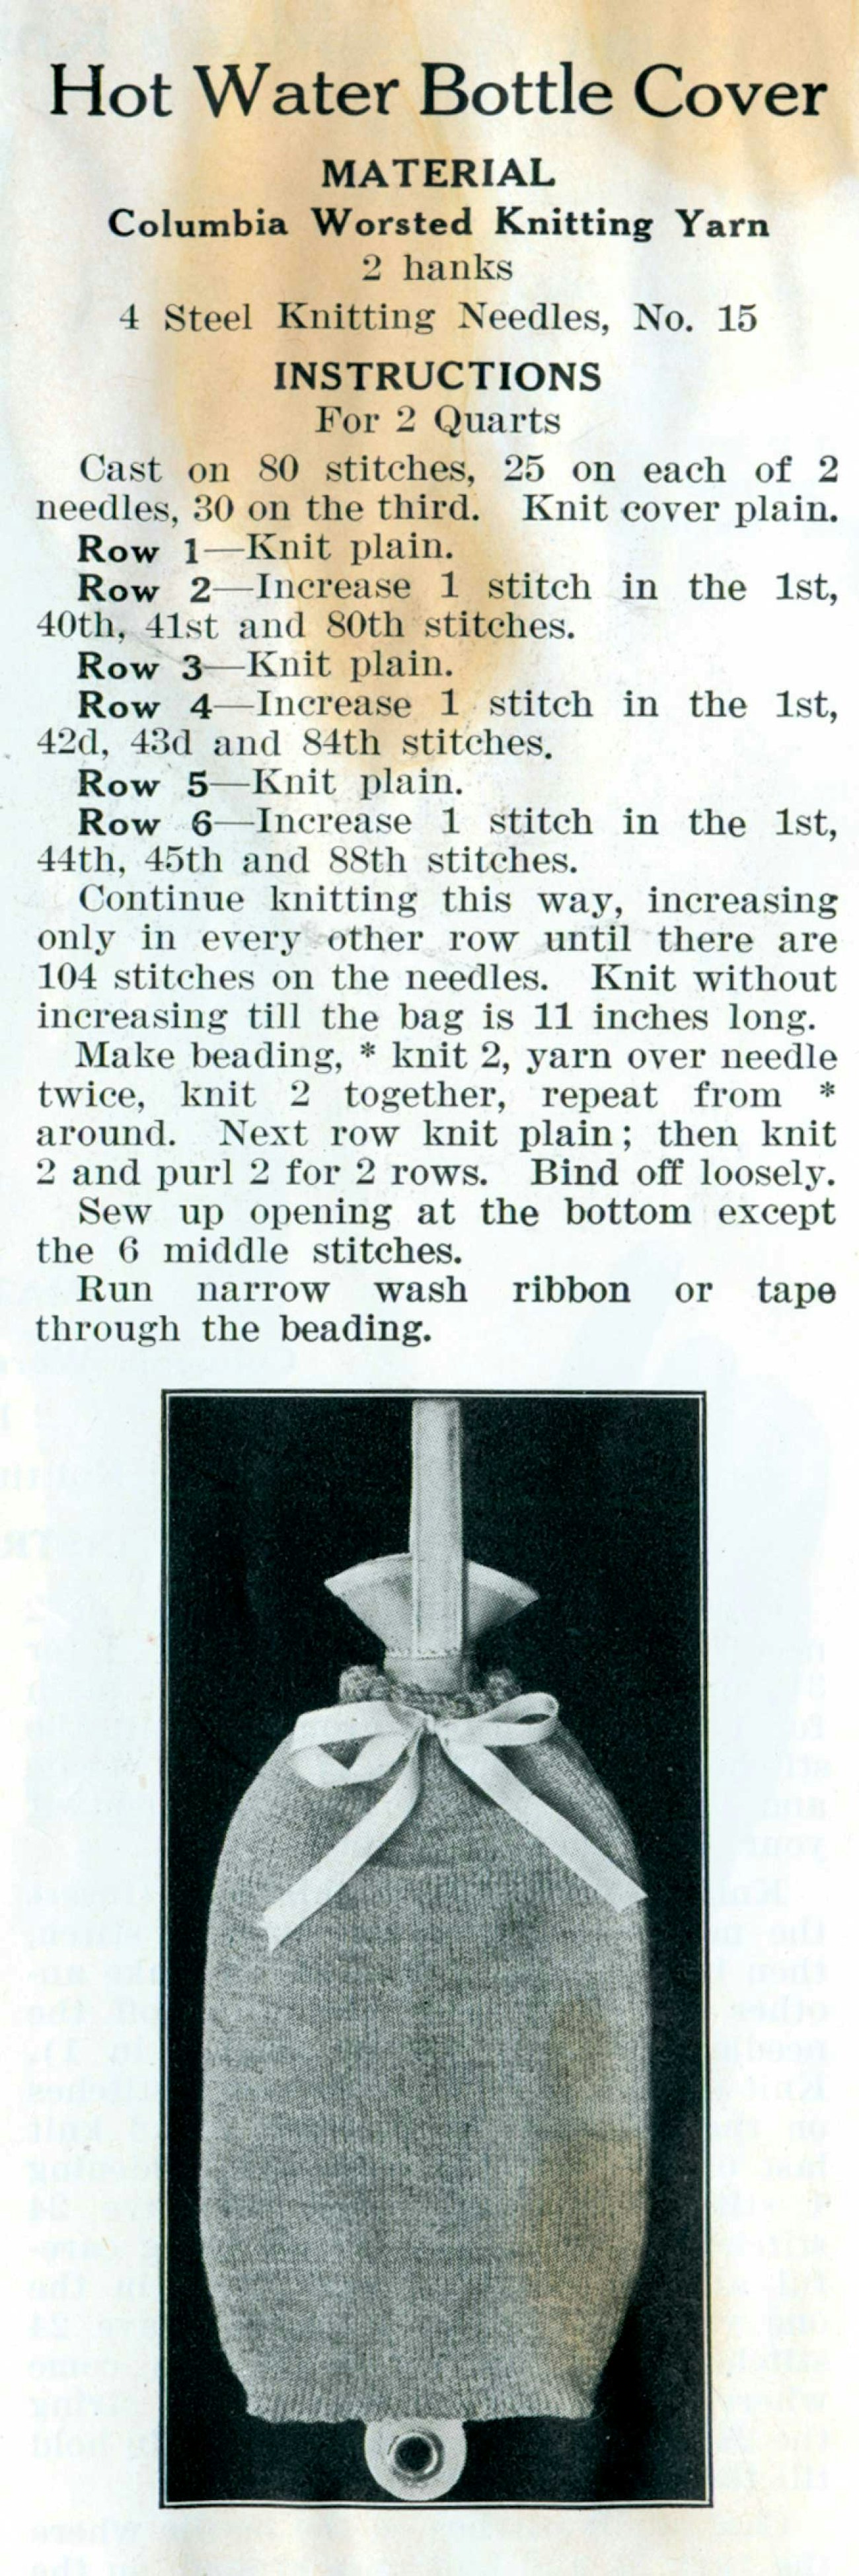 knitting-comforts-for-troops-2